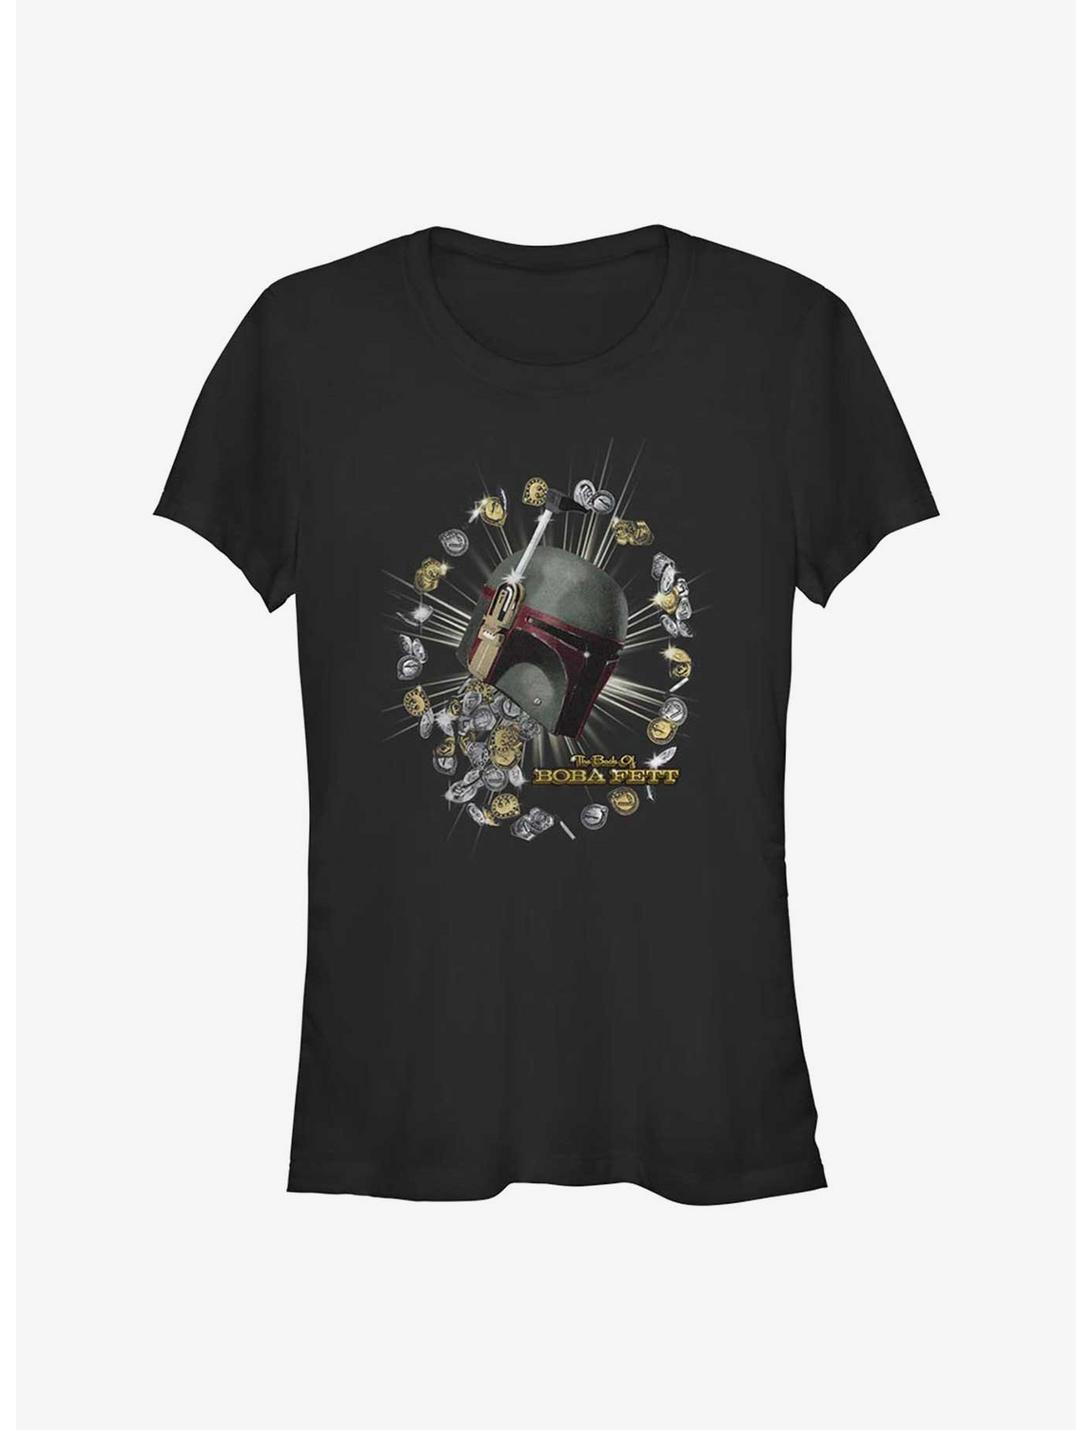 Star Wars The Book of Boba Fett All About Credits Girls T-Shirt, BLACK, hi-res